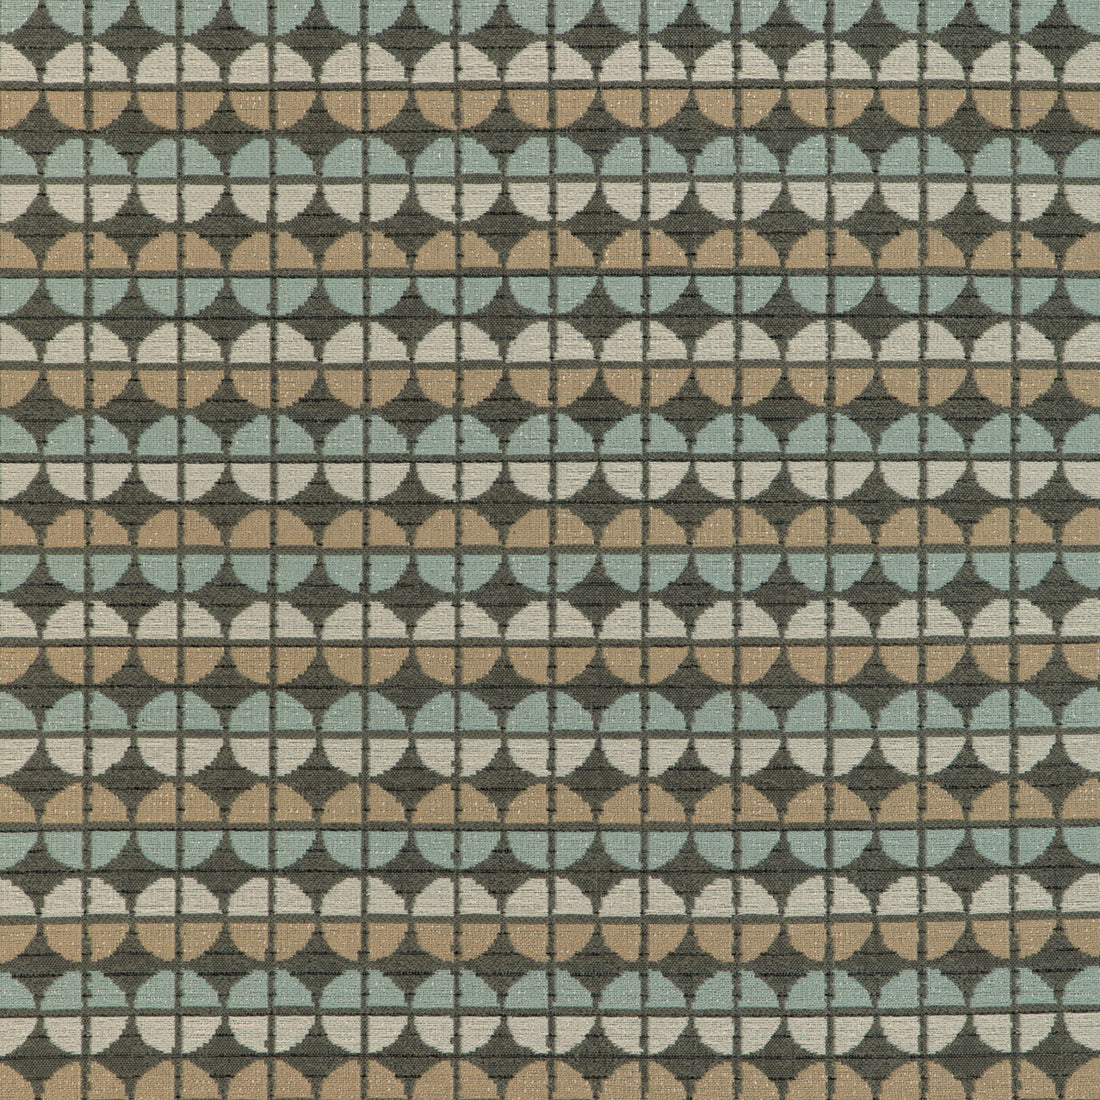 Decoy fabric in mineral color - pattern 37051.615.0 - by Kravet Contract in the Chesapeake collection